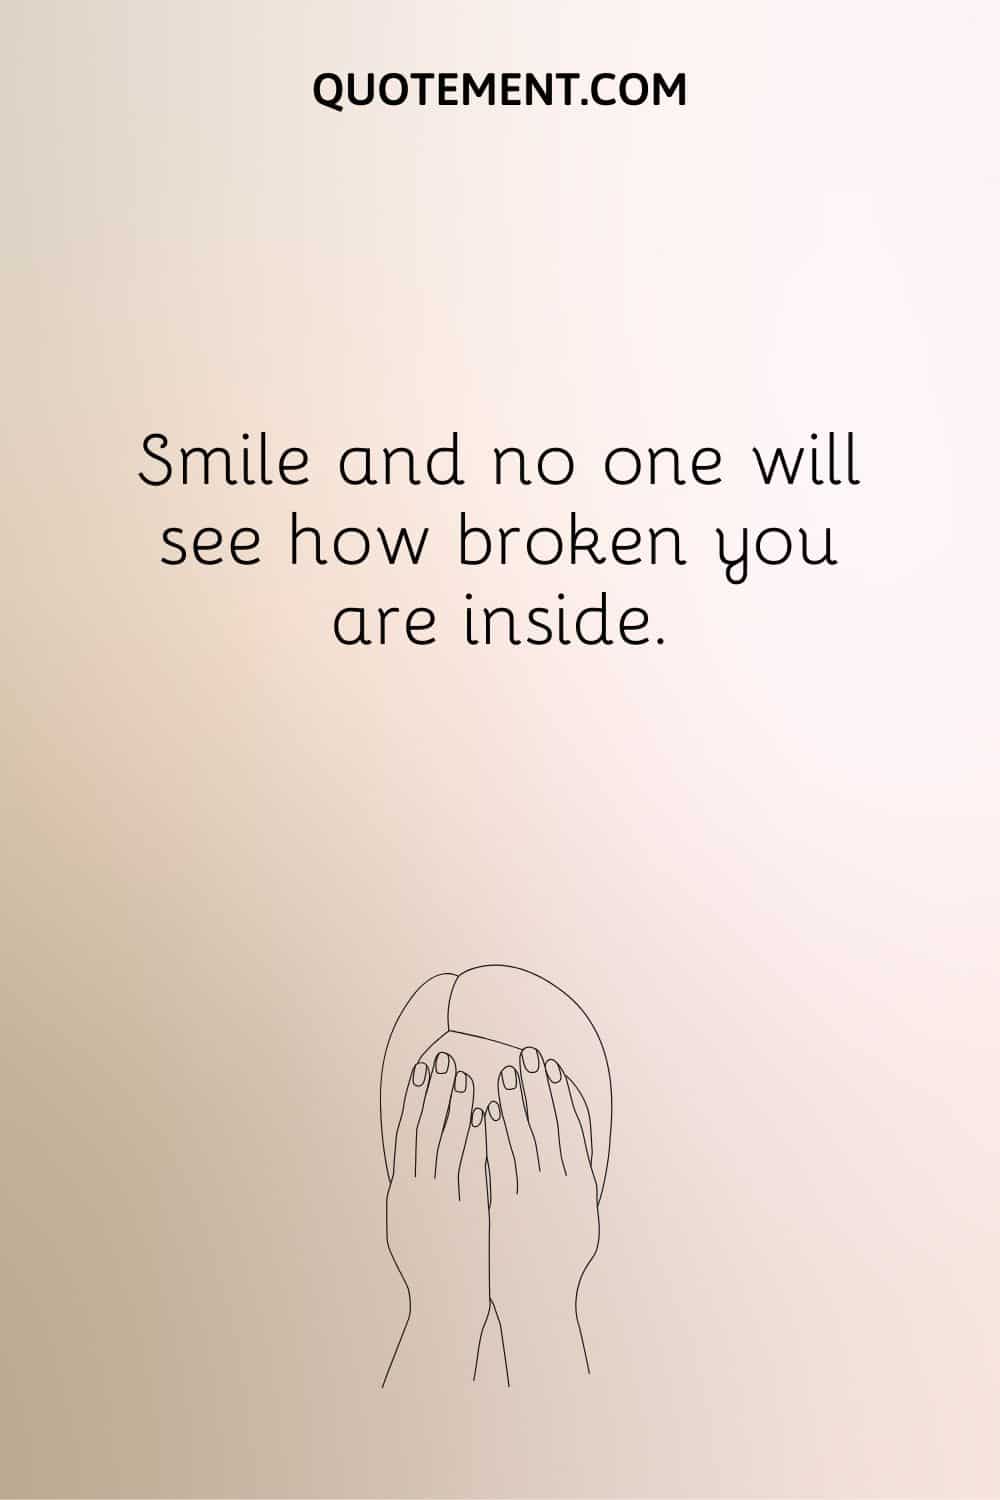 Smile and no one will see how broken you are inside.
